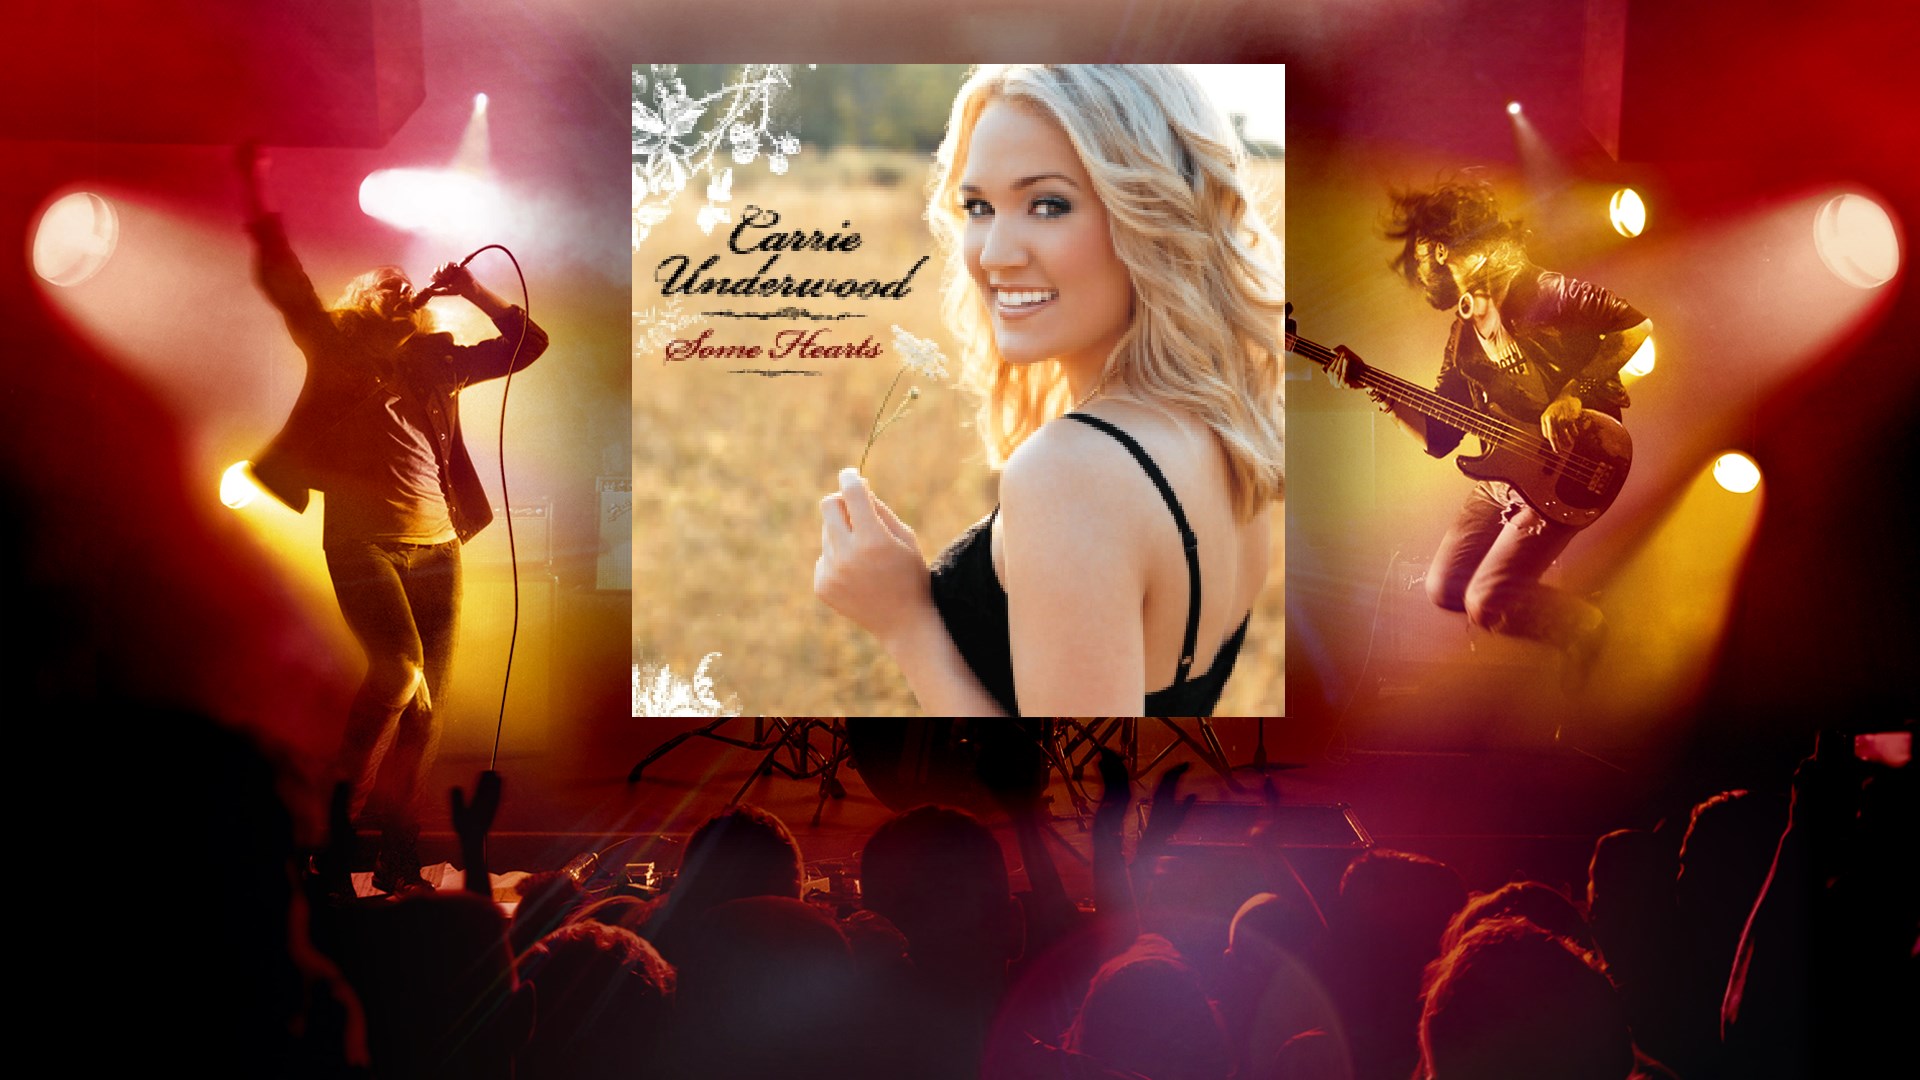 Buy "Before He Cheats" Carrie Underwood Microsoft Store